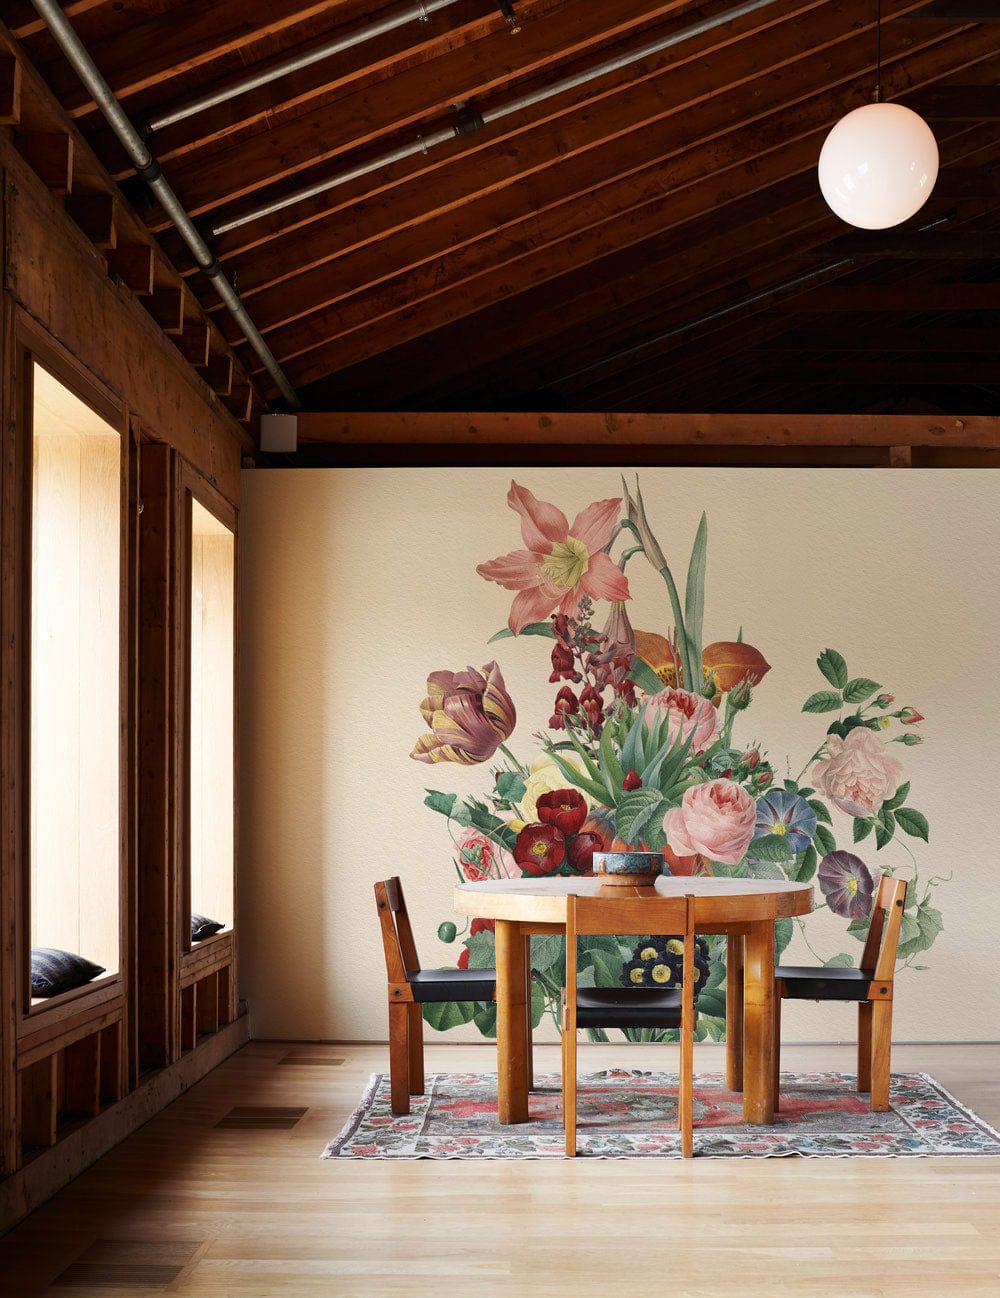 mural of multi-colored flowers for the dining room